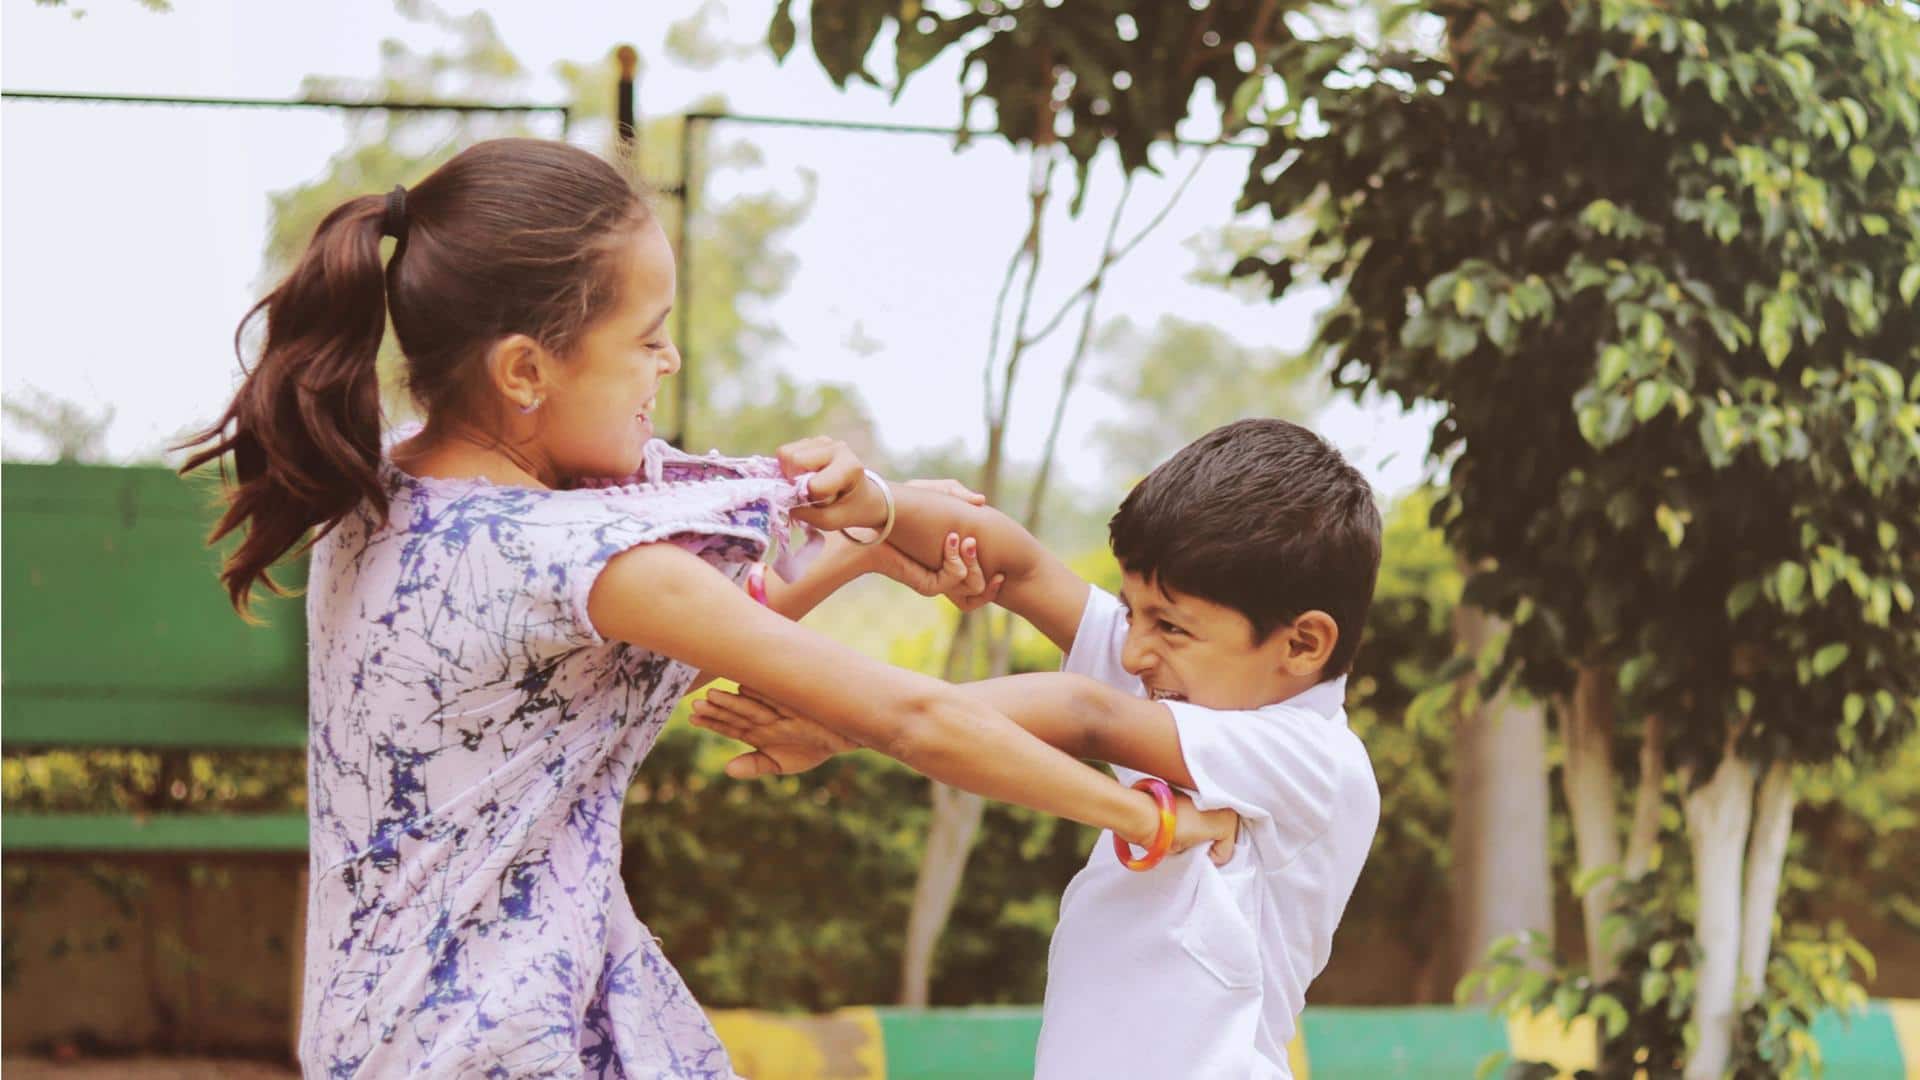 Sibling rivalry 101: The ultimate guide to annoying your siblings